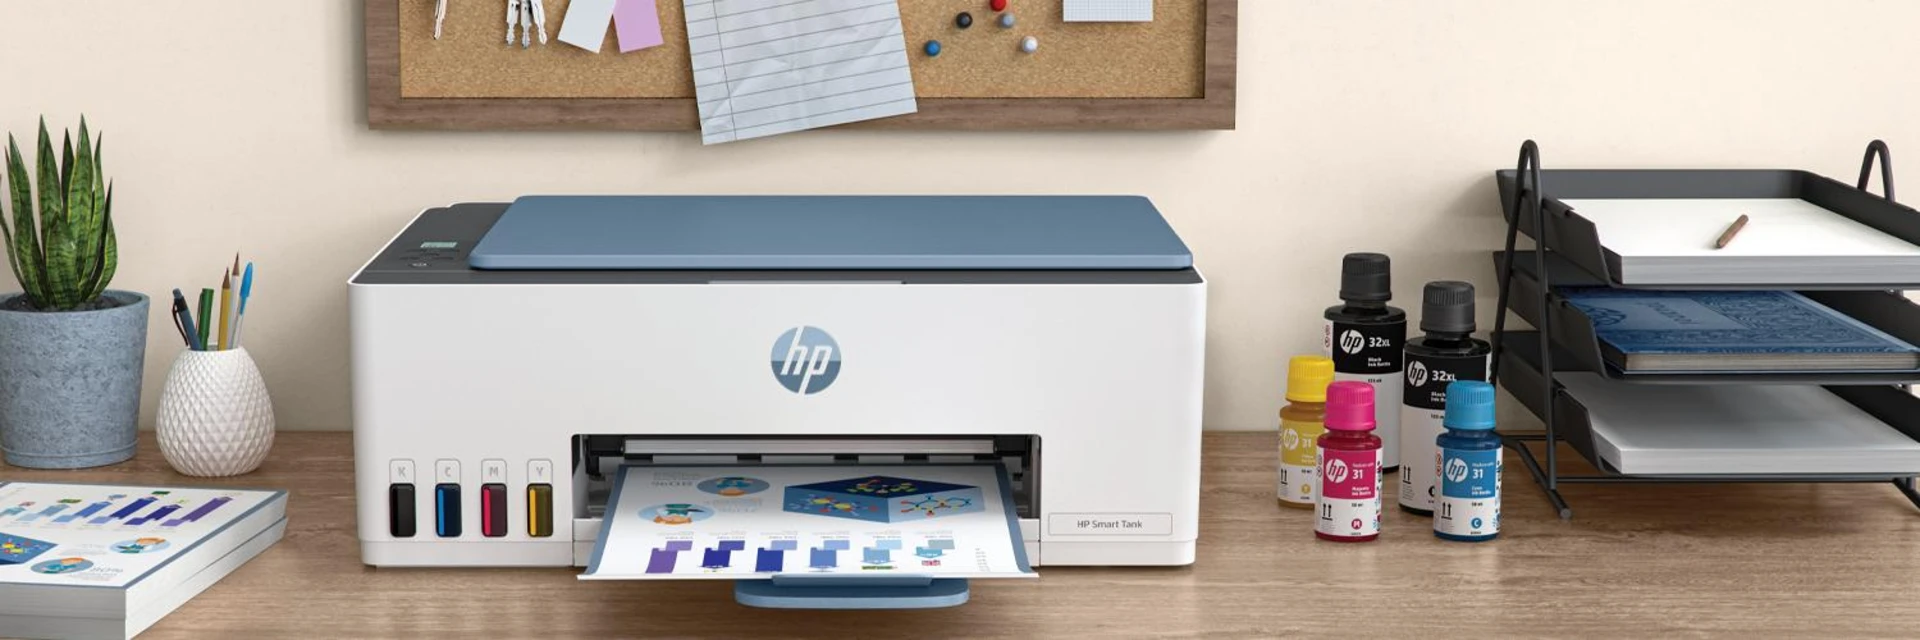 HP SMART TANK VS INK CARTRIDGE PRINTERS: WHICH IS BEST FOR YOU?